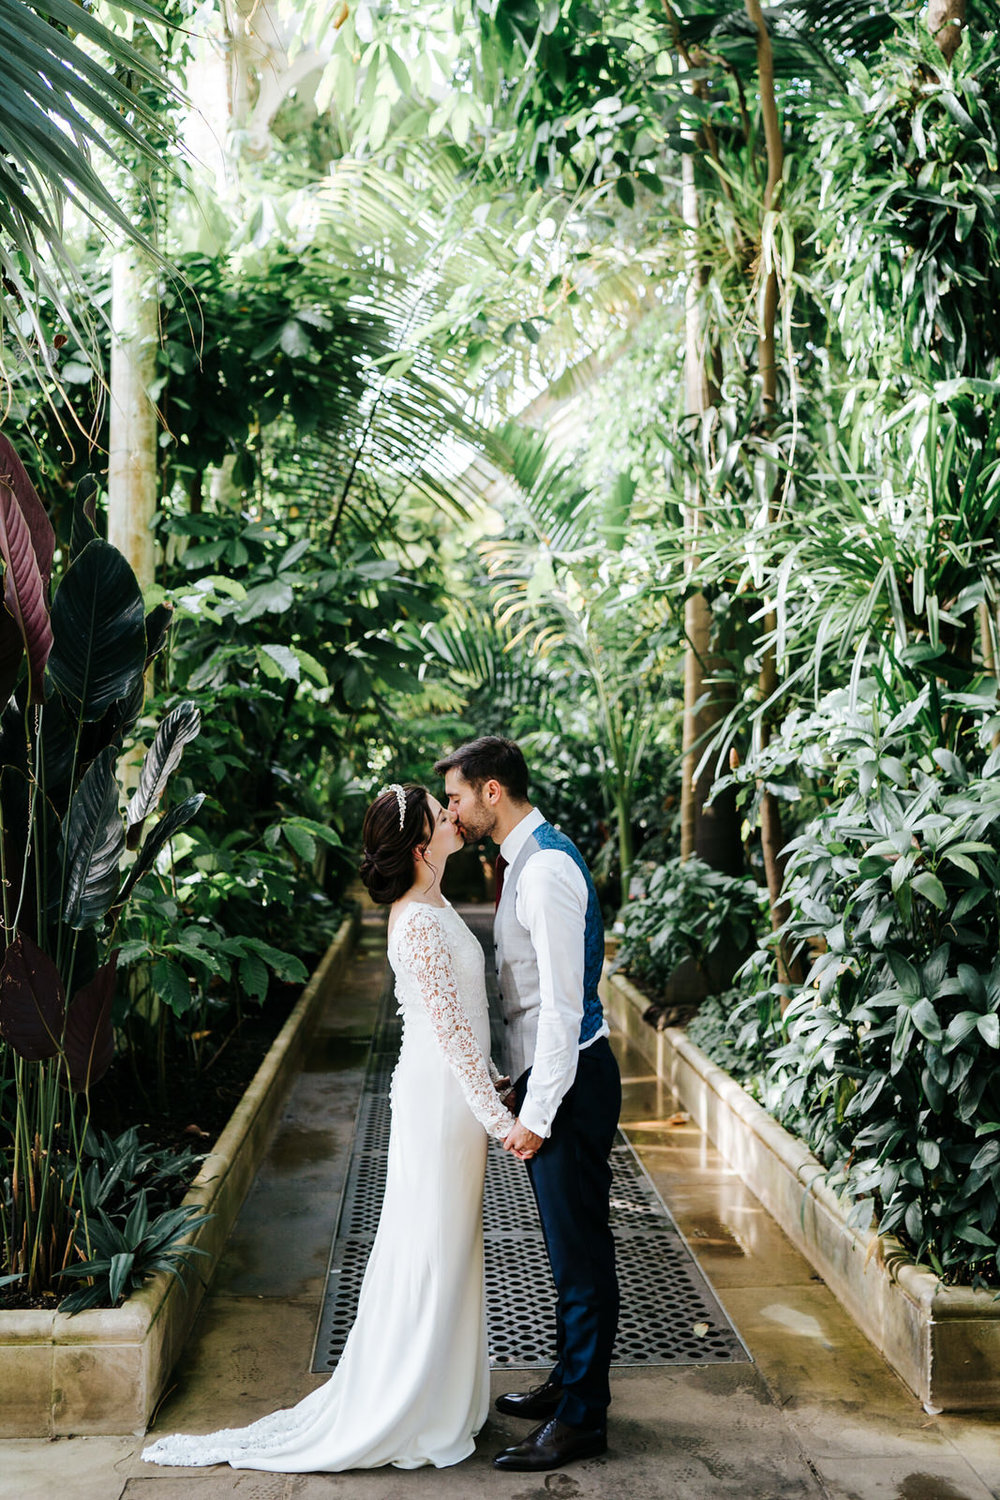  bride and groom kiss and hold hands for a posed photograph inside the Palm House at Kew Gardens 